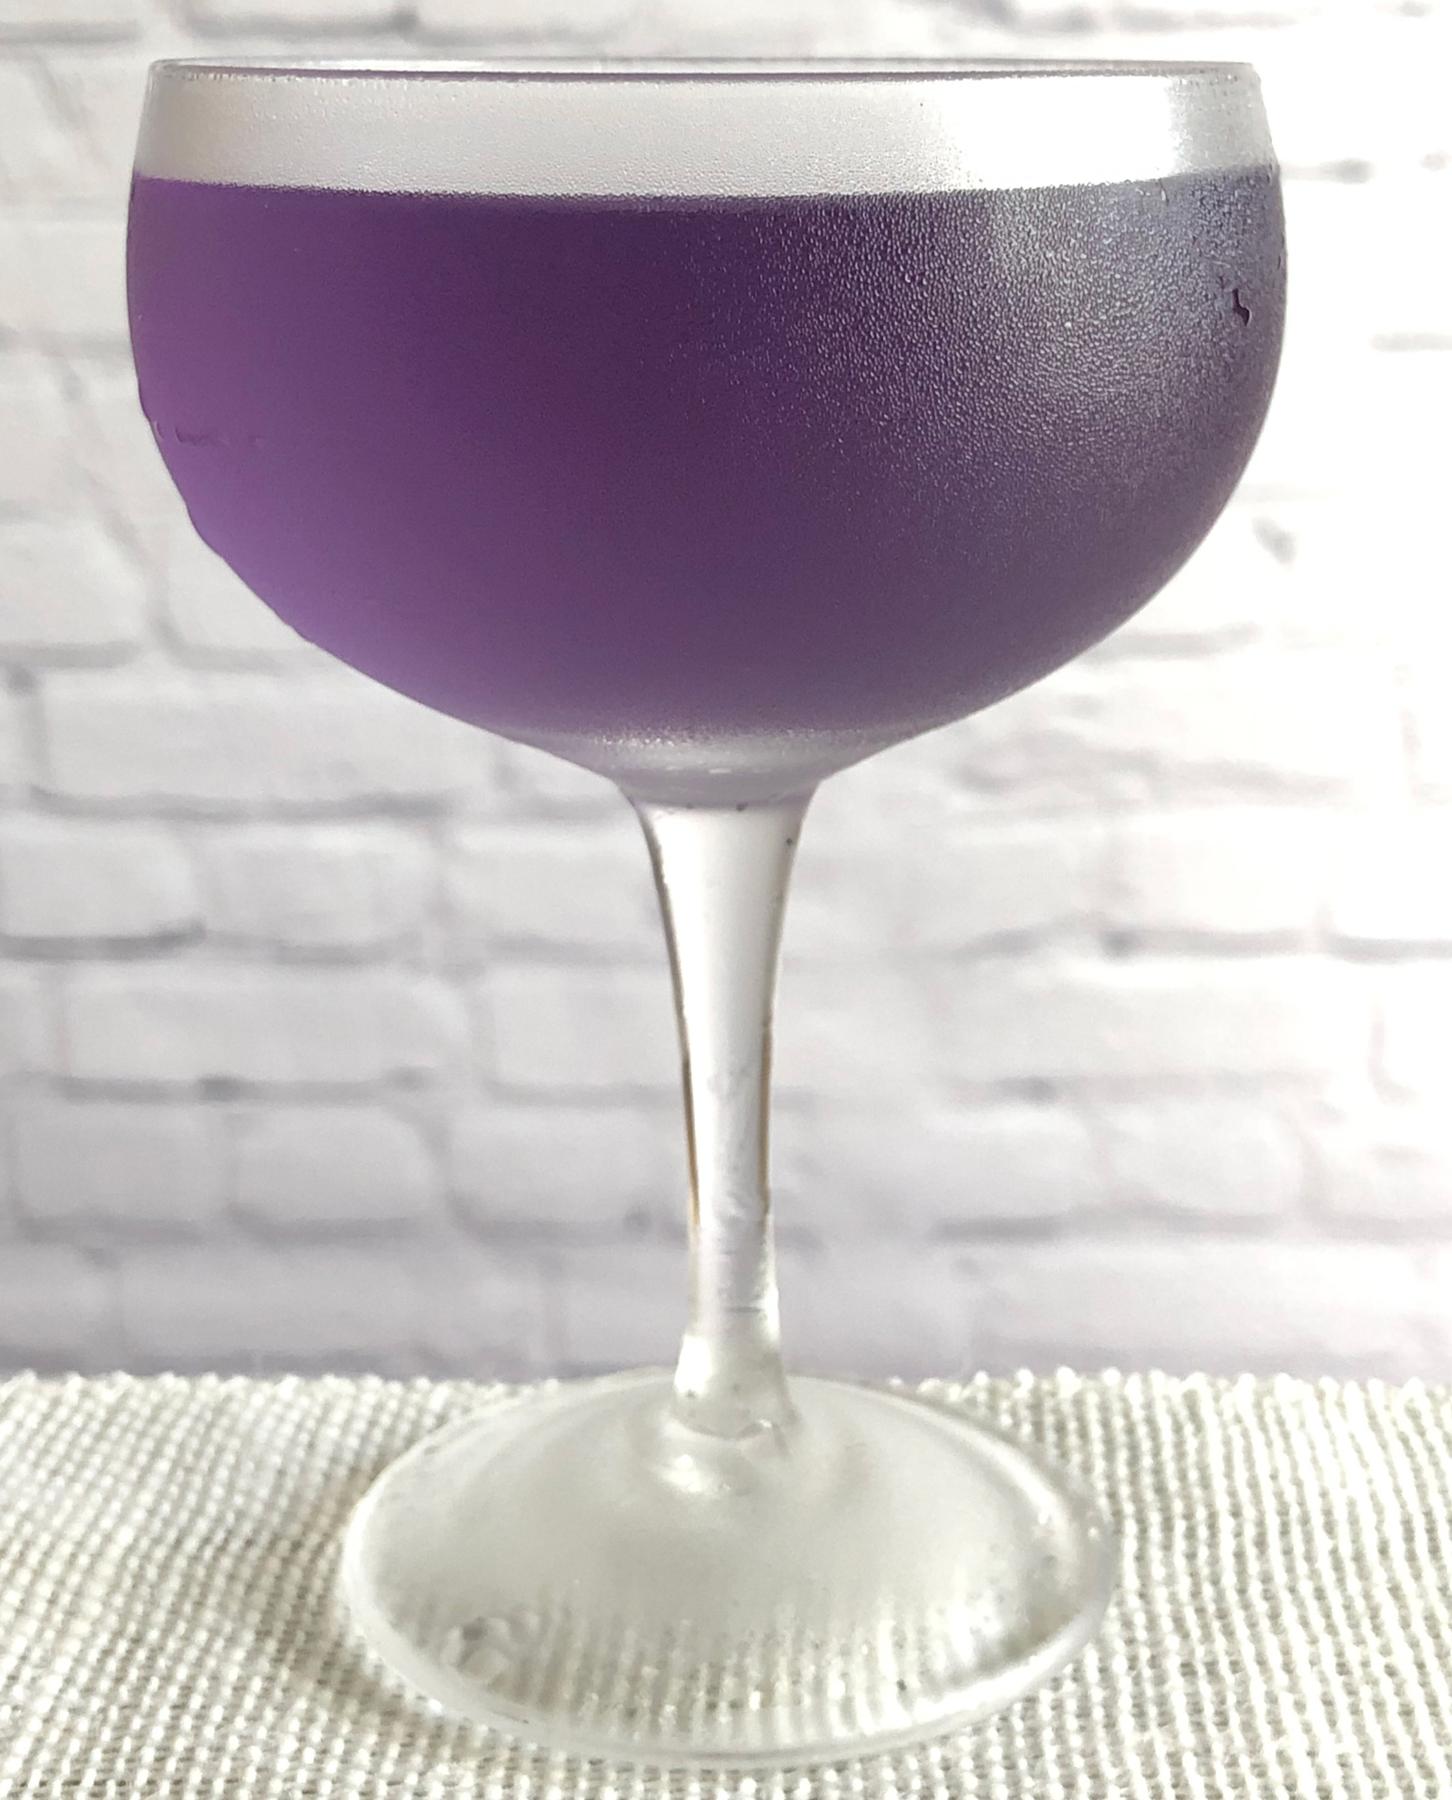 An example of the Yale Cocktail, the mixed drink (drink), by Eric Felten, Wall Street Journal, featuring Hayman’s London Dry Gin, Rothman & Winter Crème de Violette, Dolin Dry Vermouth de Chambéry, and Angostura bitters; photo by Lee Edwards